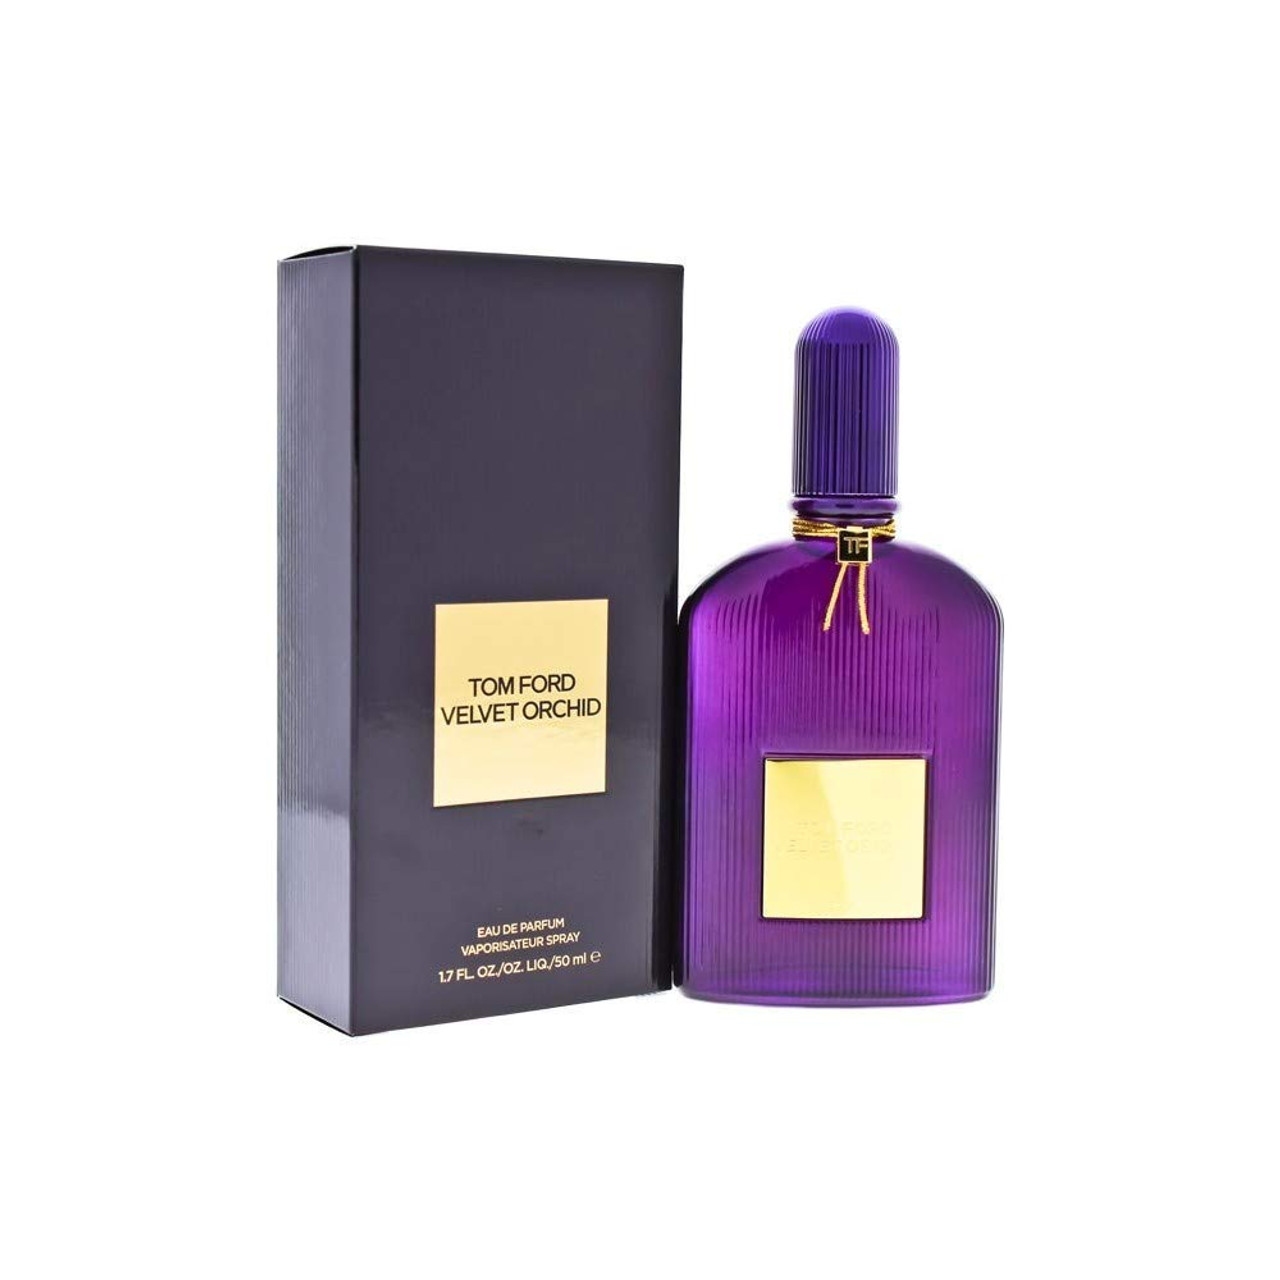 Tom Ford Velvet Orchid Profile Picture